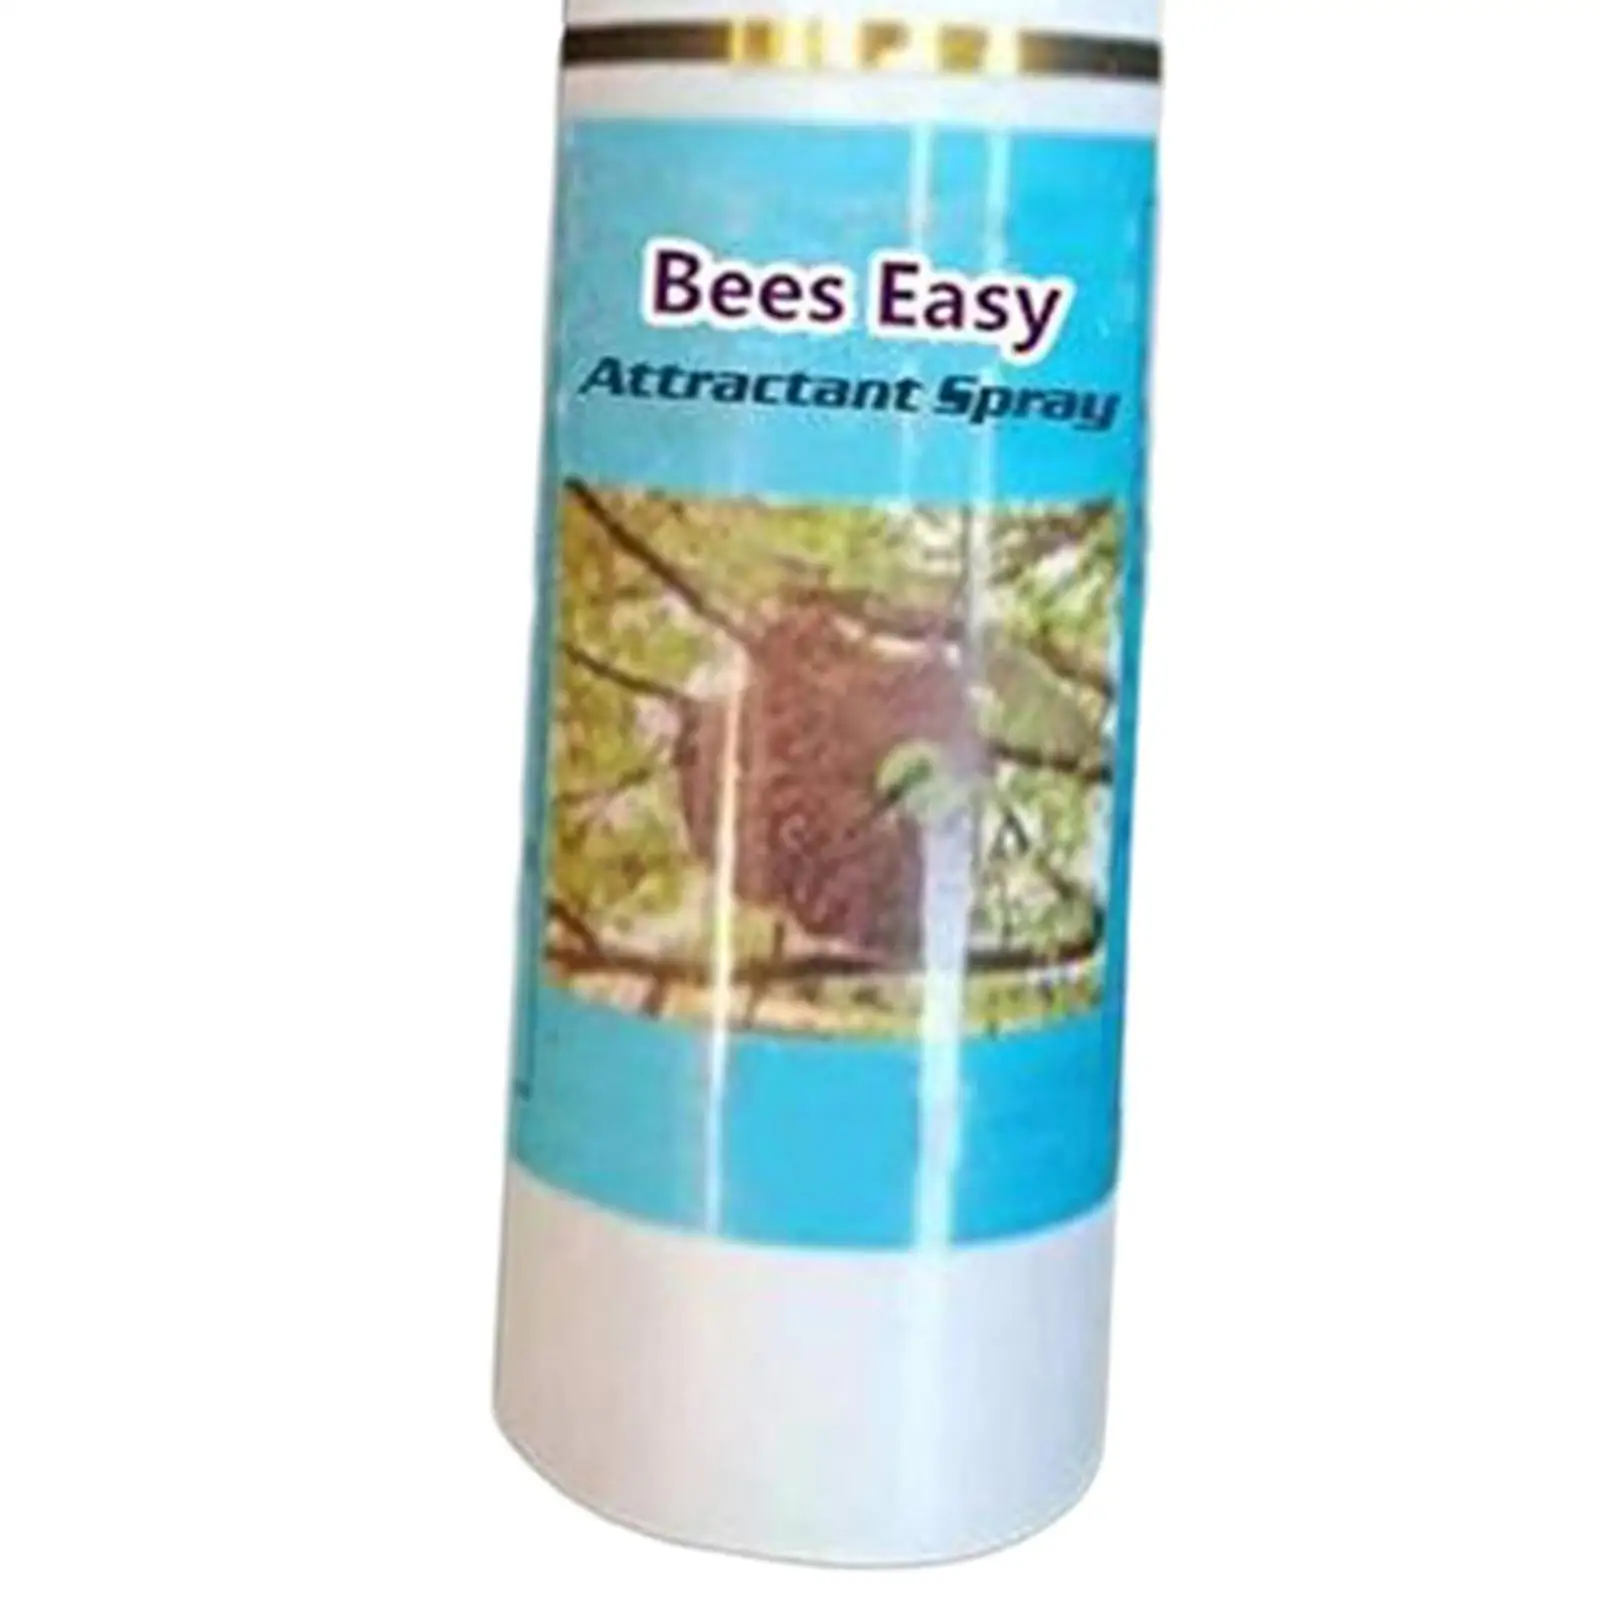 Bee Attractant Lure Pollinating Bees Trapping Bee Attract Natural Hornet Spray Bottle Bee Attractant Spray Honey Hive for Indoor